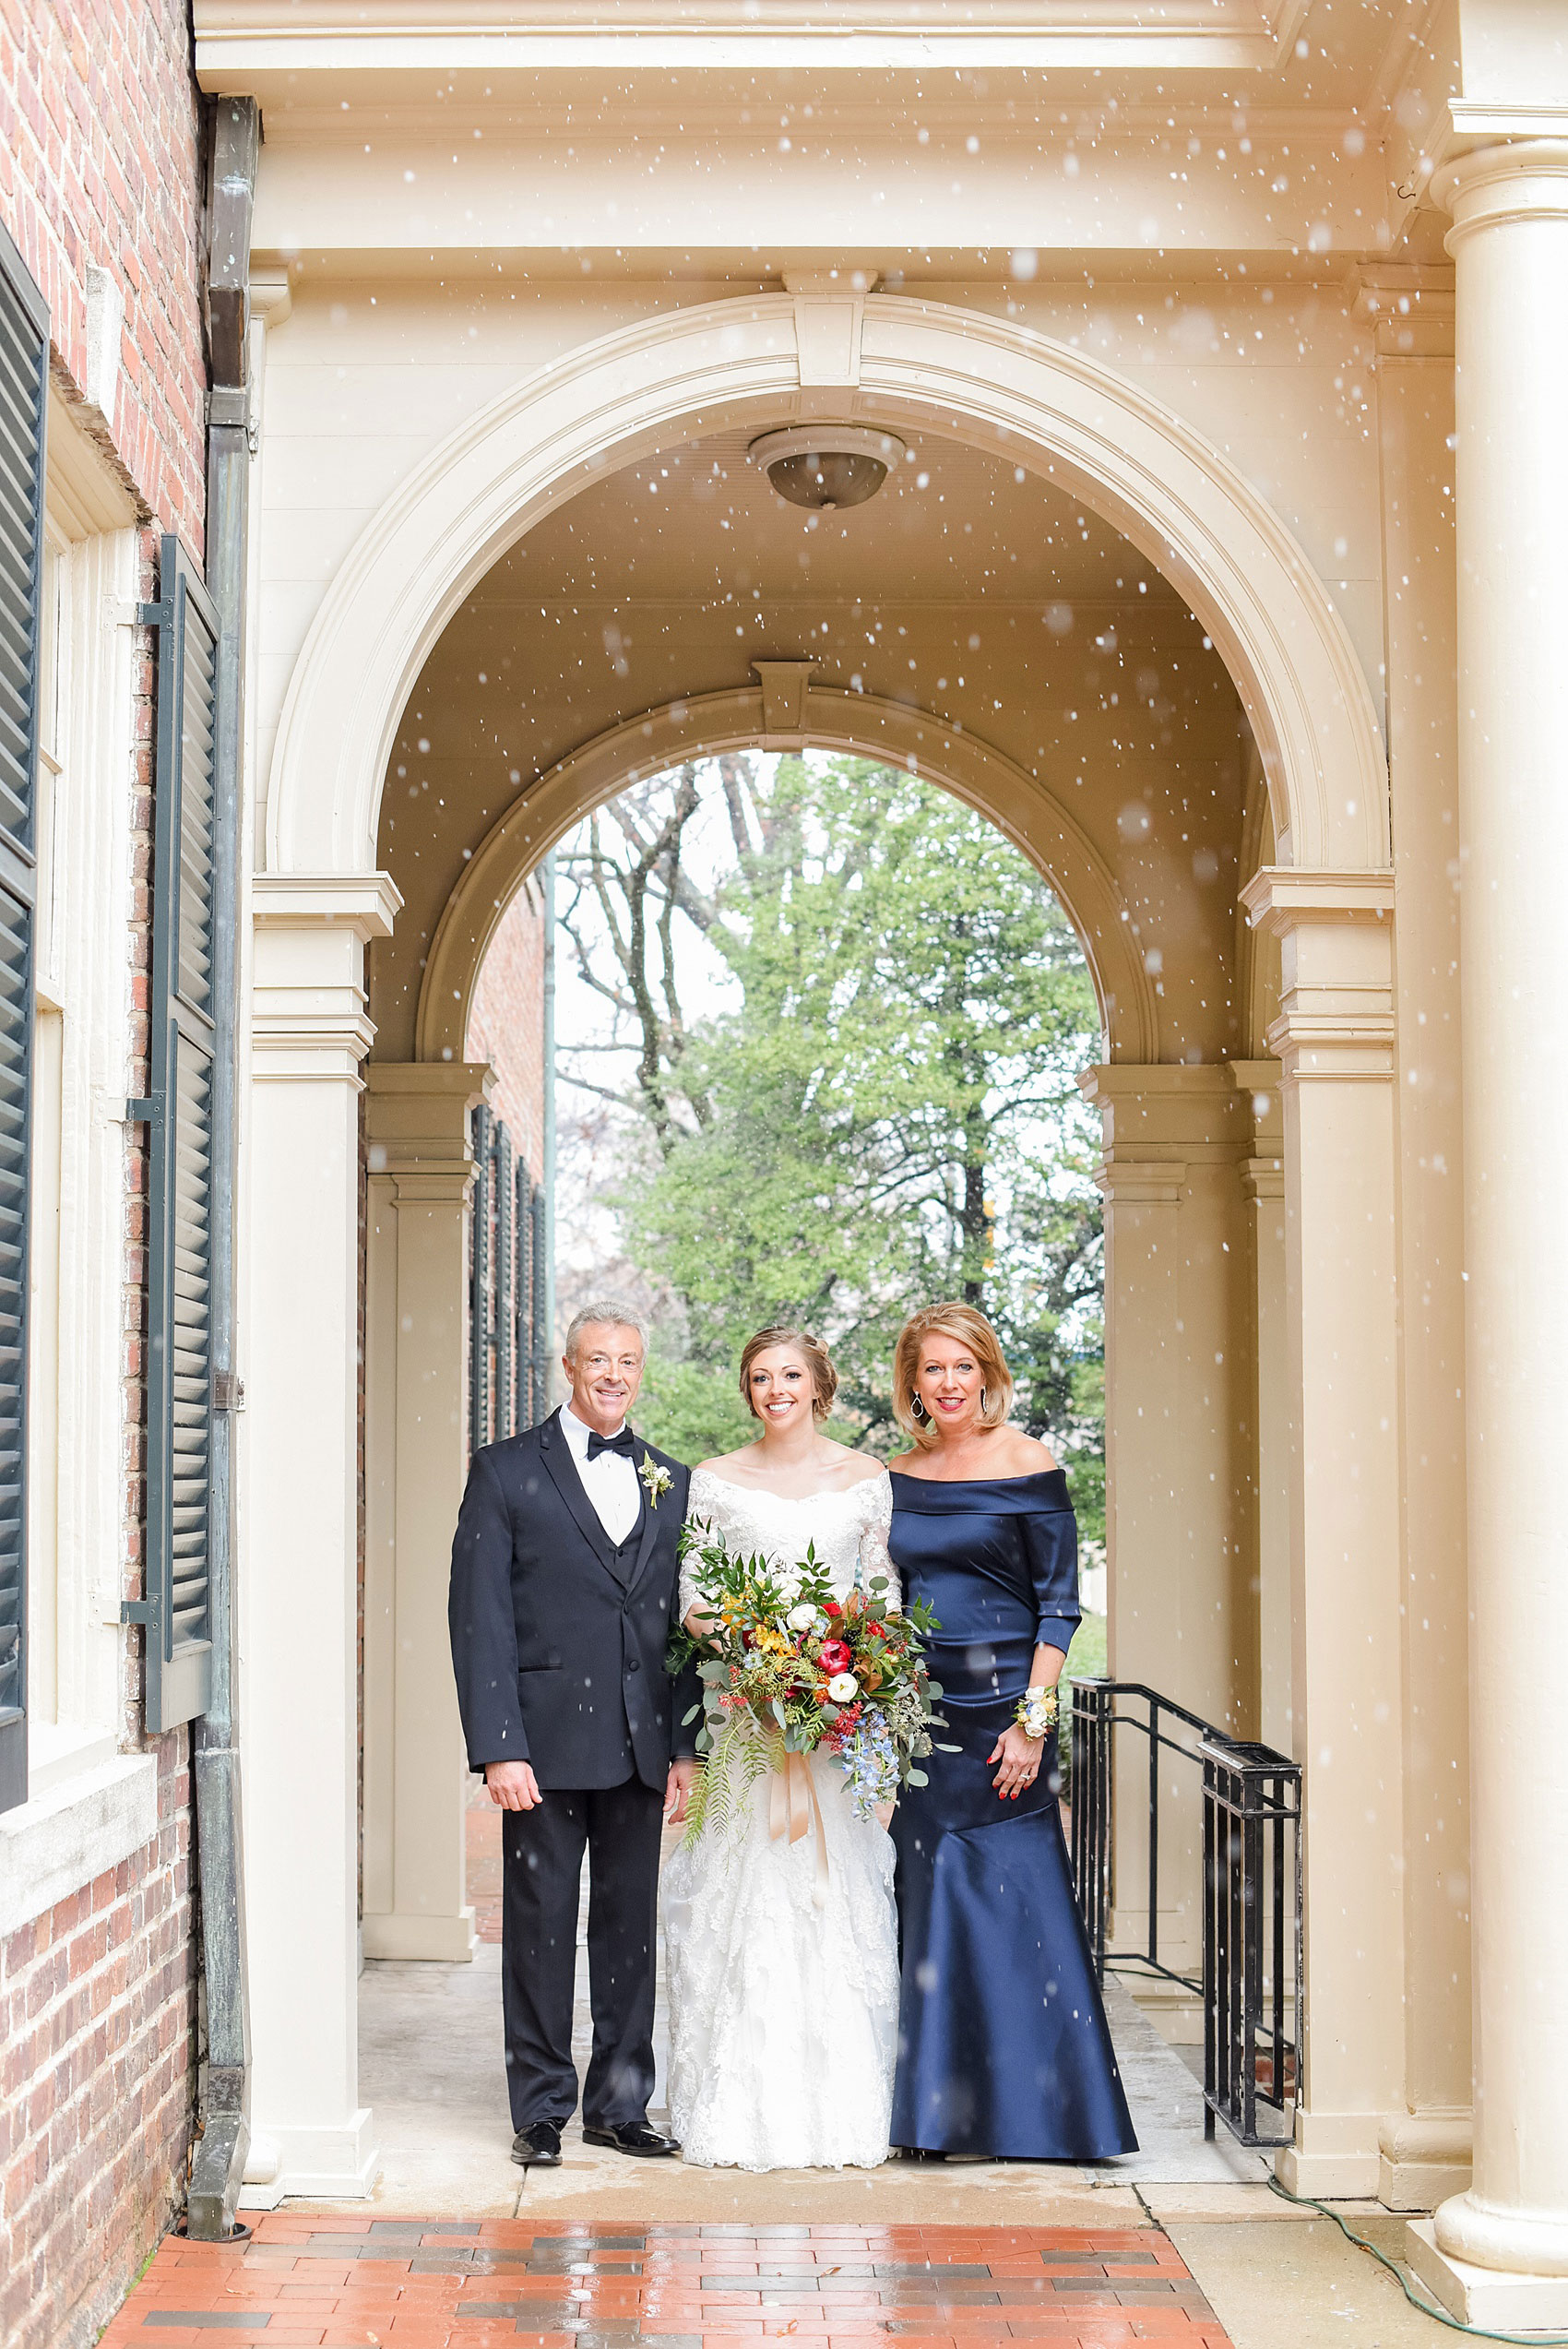 Beautiful wedding photos at The Carolina Inn at Chapel Hill, North Carolina by Mikkel Paige Photography. Photo of the bride with her parents at her wintery wedding. Click through to see the rest of this gorgeous winter wedding! #thecarolinainn #snowywedding